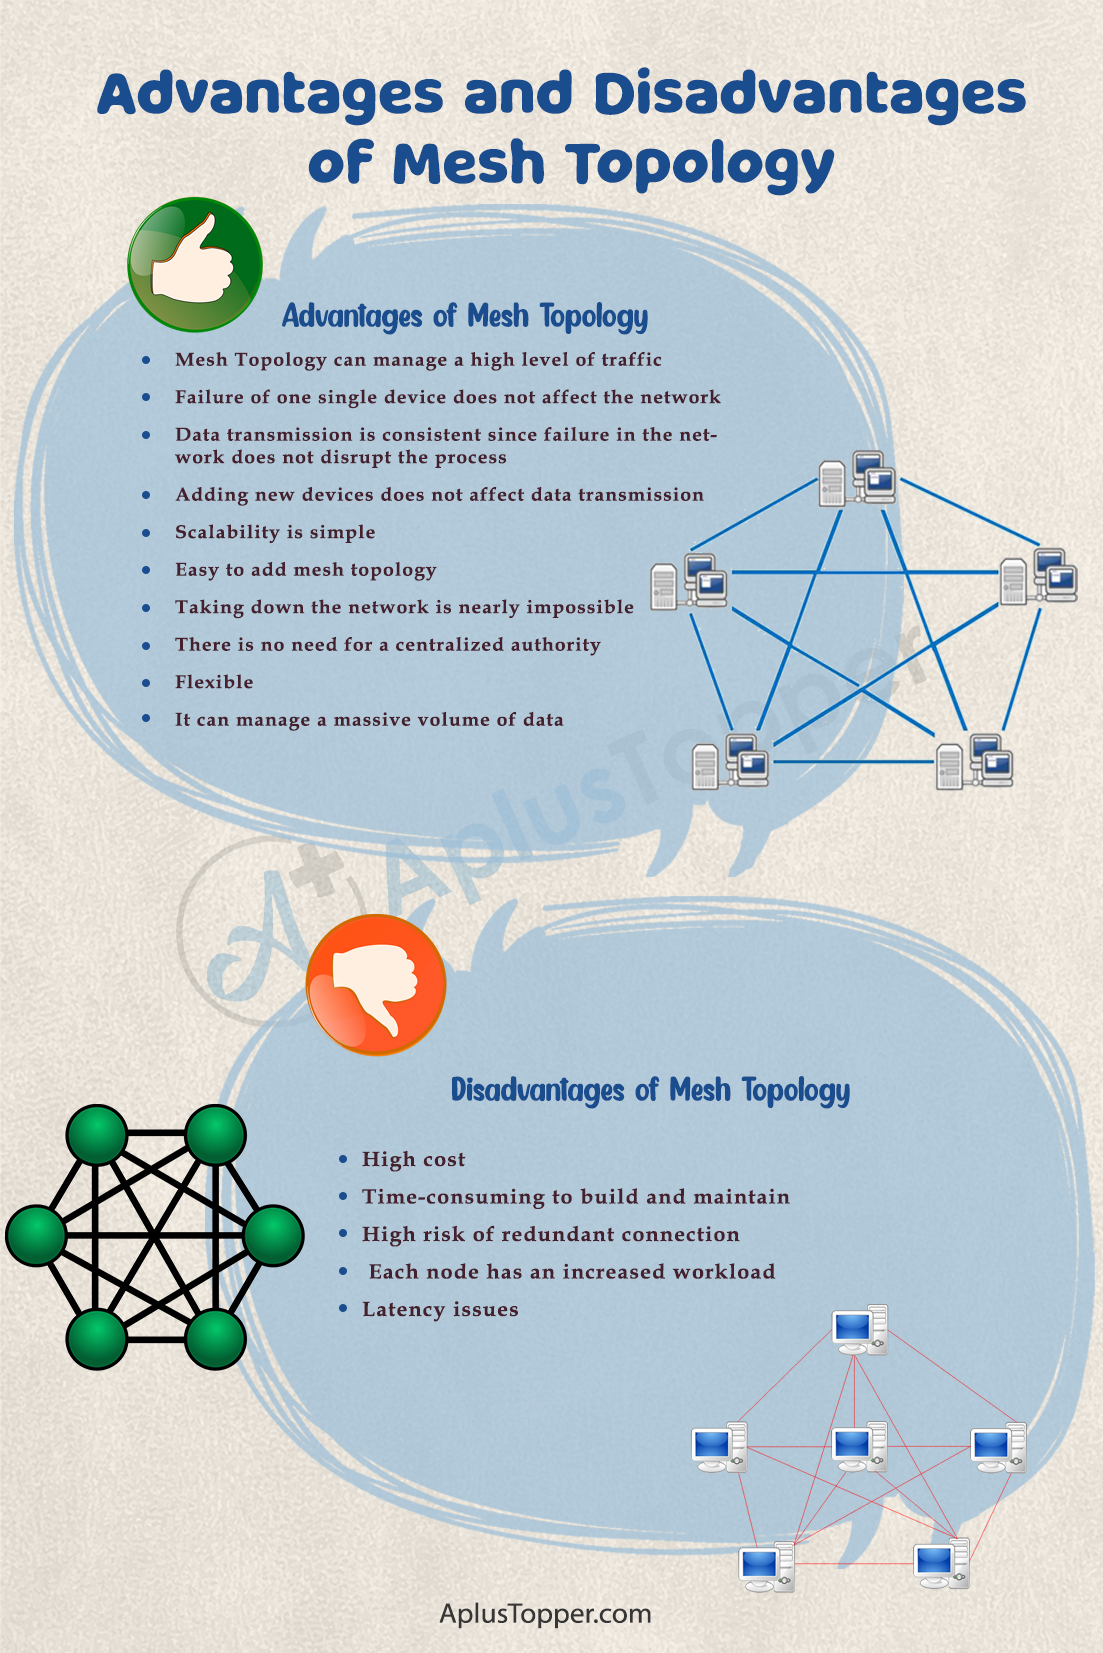 Advantages and Disadvantages of mesh Topology 2